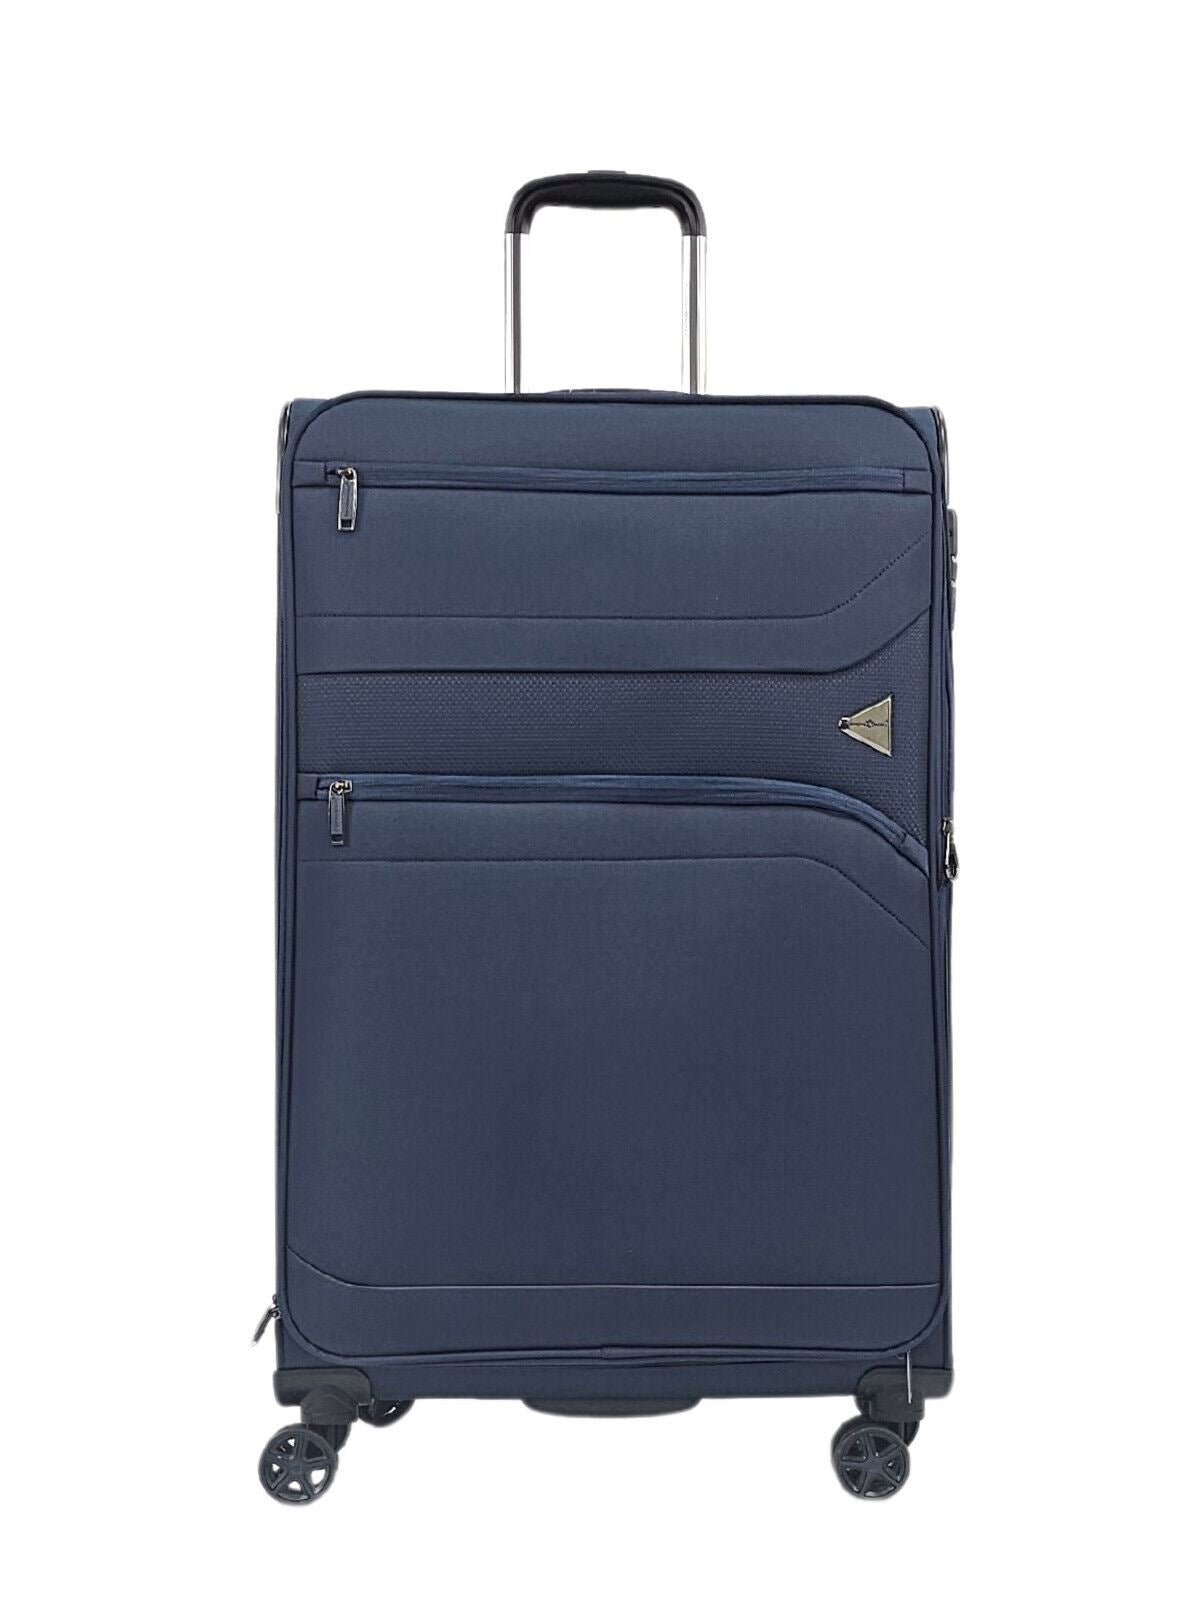 Lightweight Soft  Dual 4 Wheel Luggage Suitcases